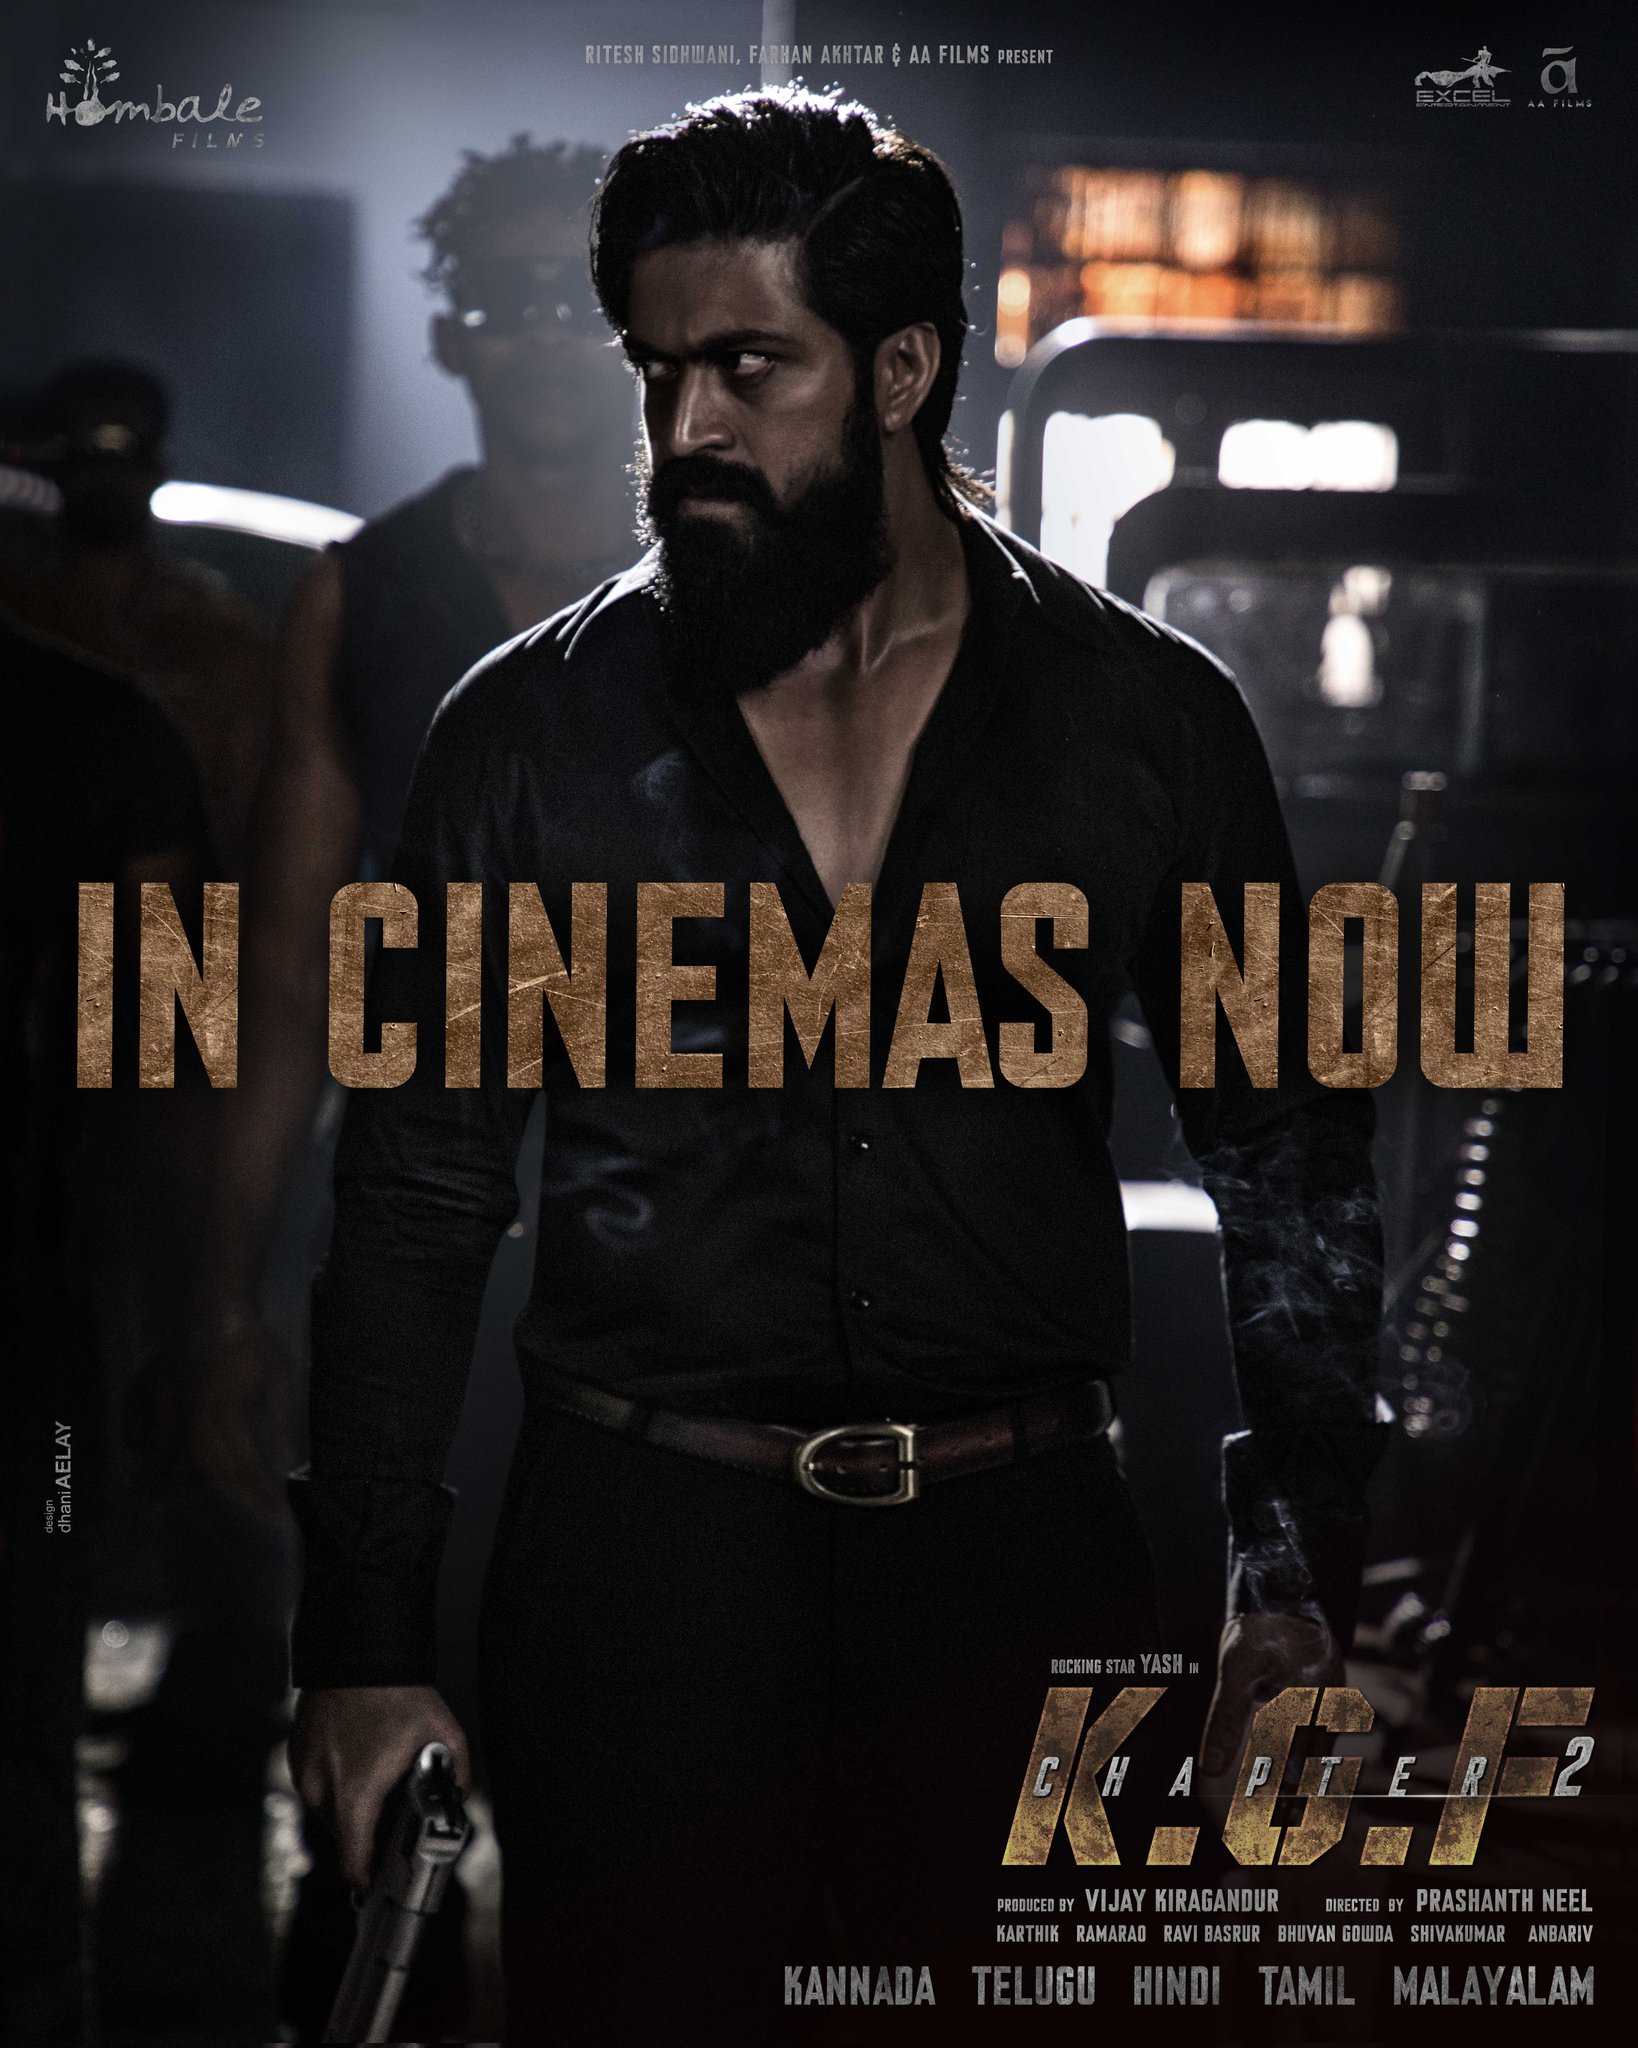 K.G.F Chapter 2 2022 Tamil Movie 720p | 480p DVDScr 1.7GB | 400MB Download